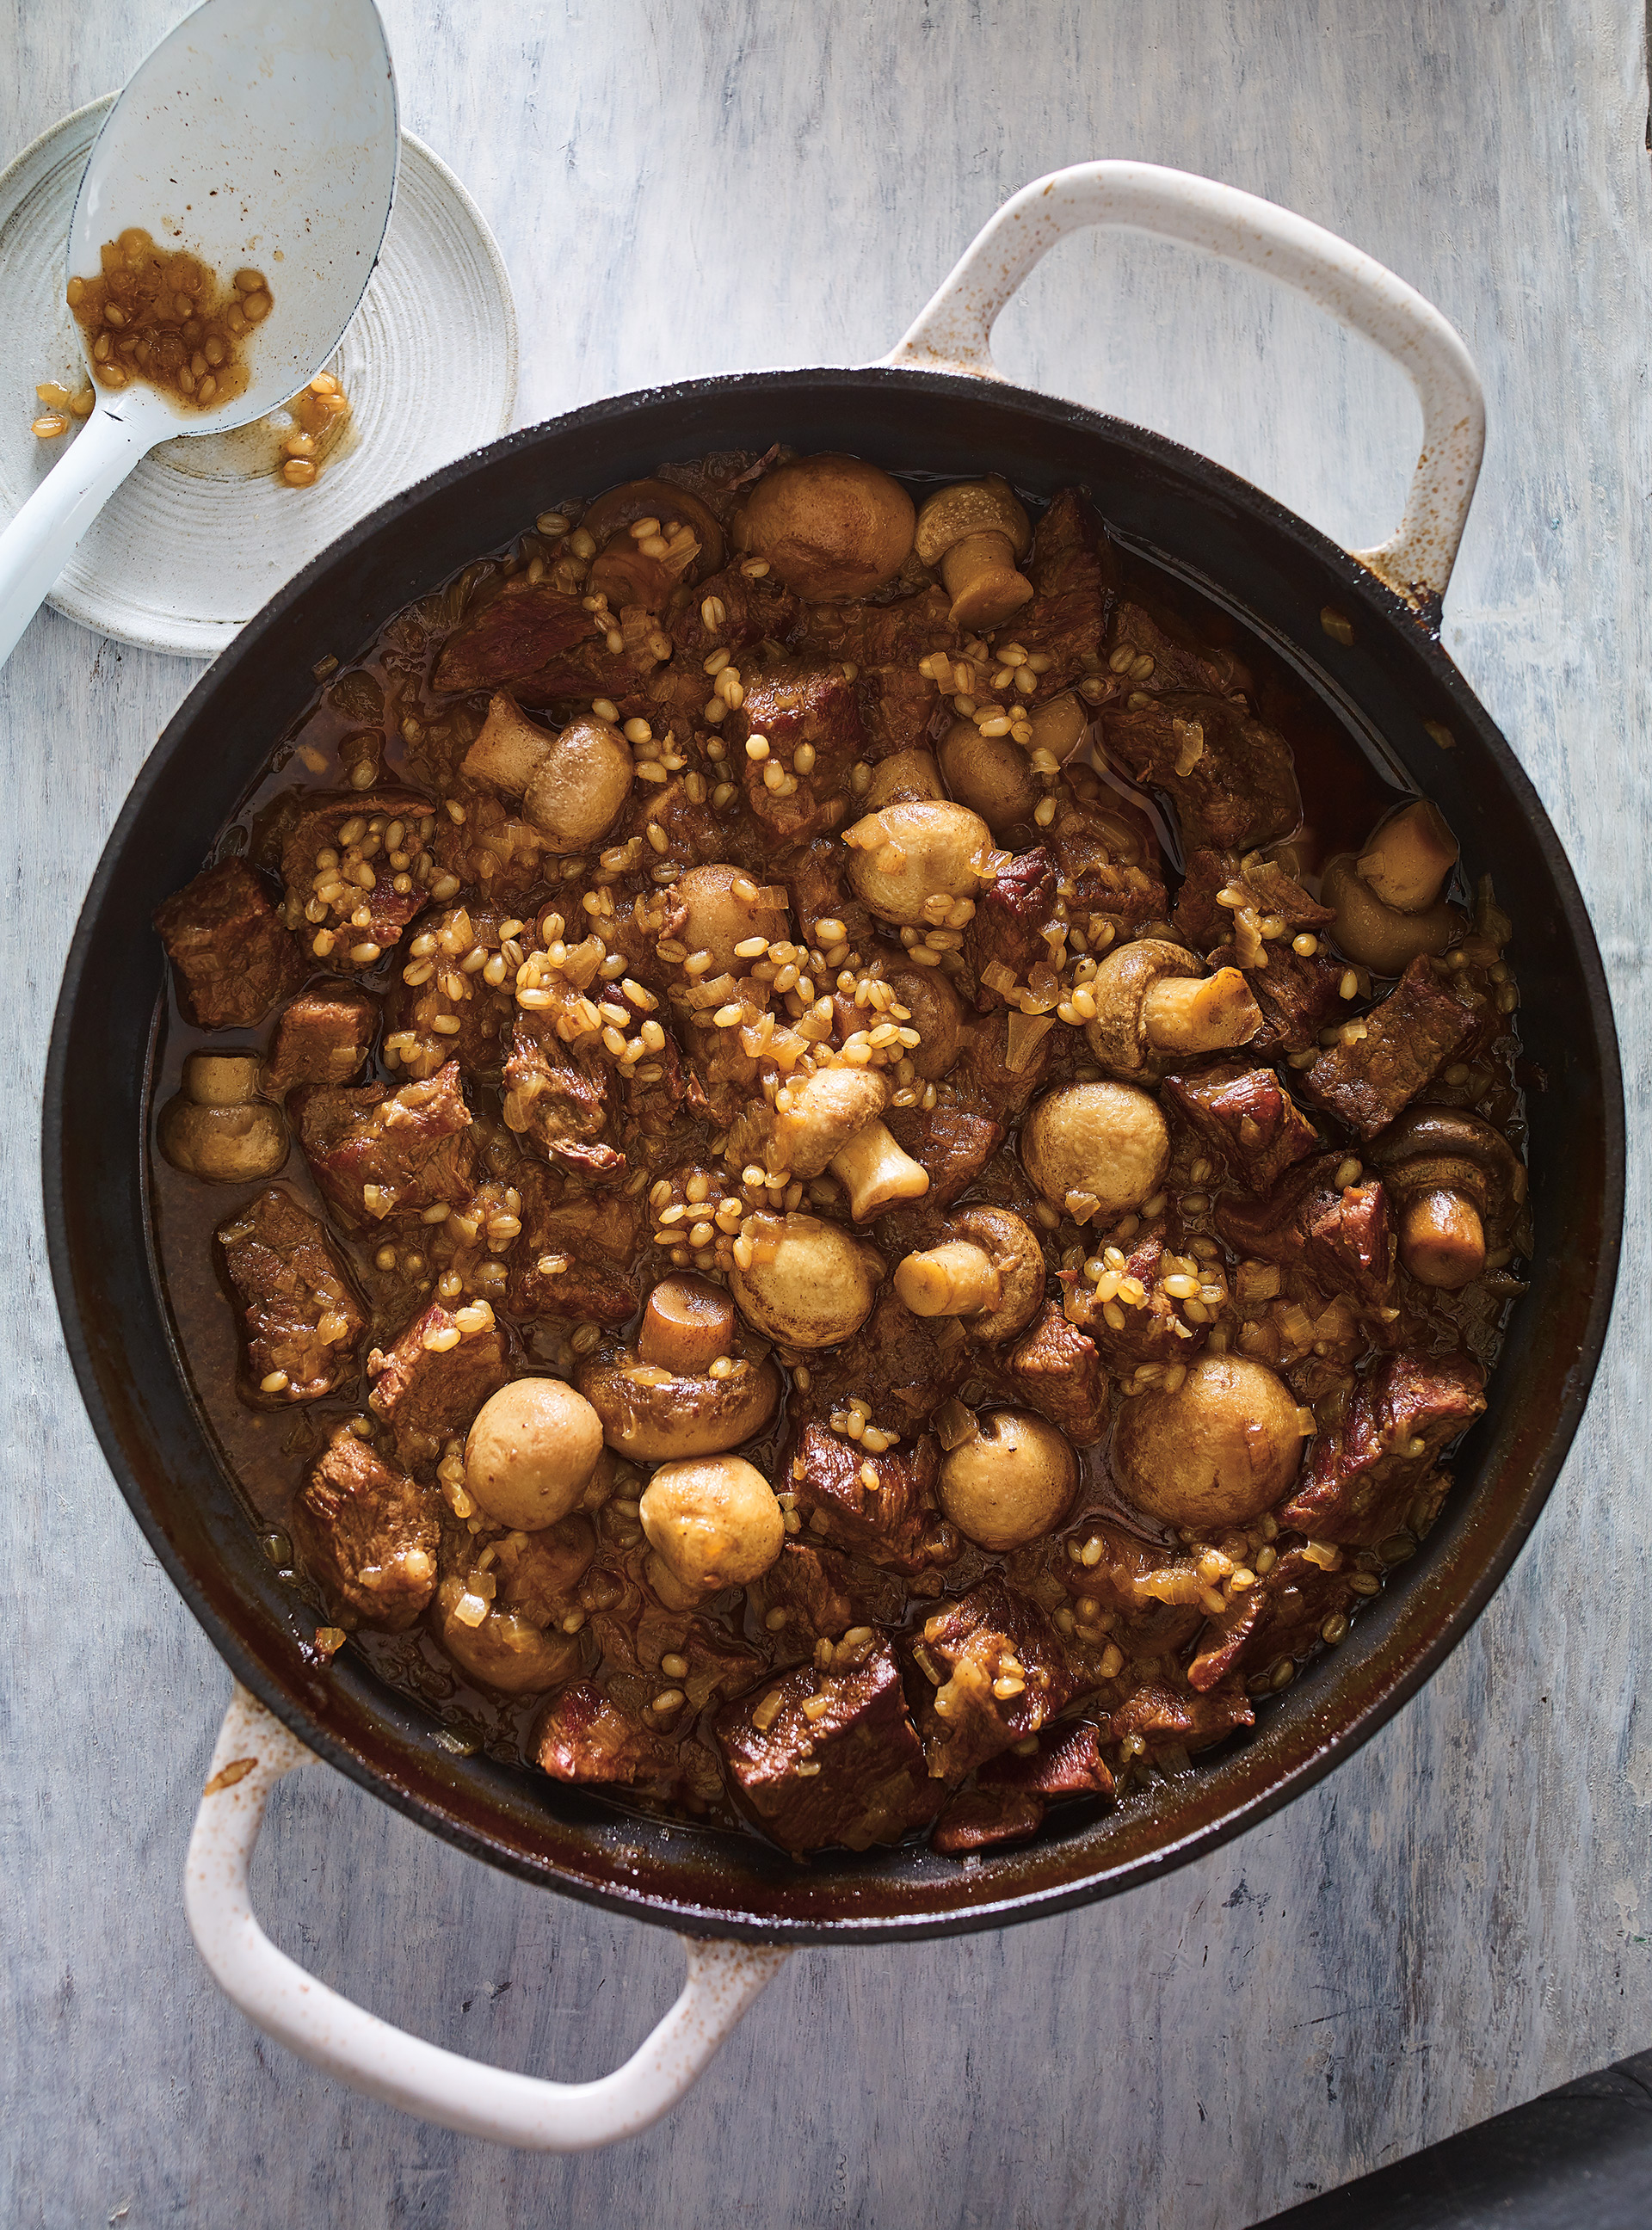 Stewed Beef with Mushrooms and Wheat Berries